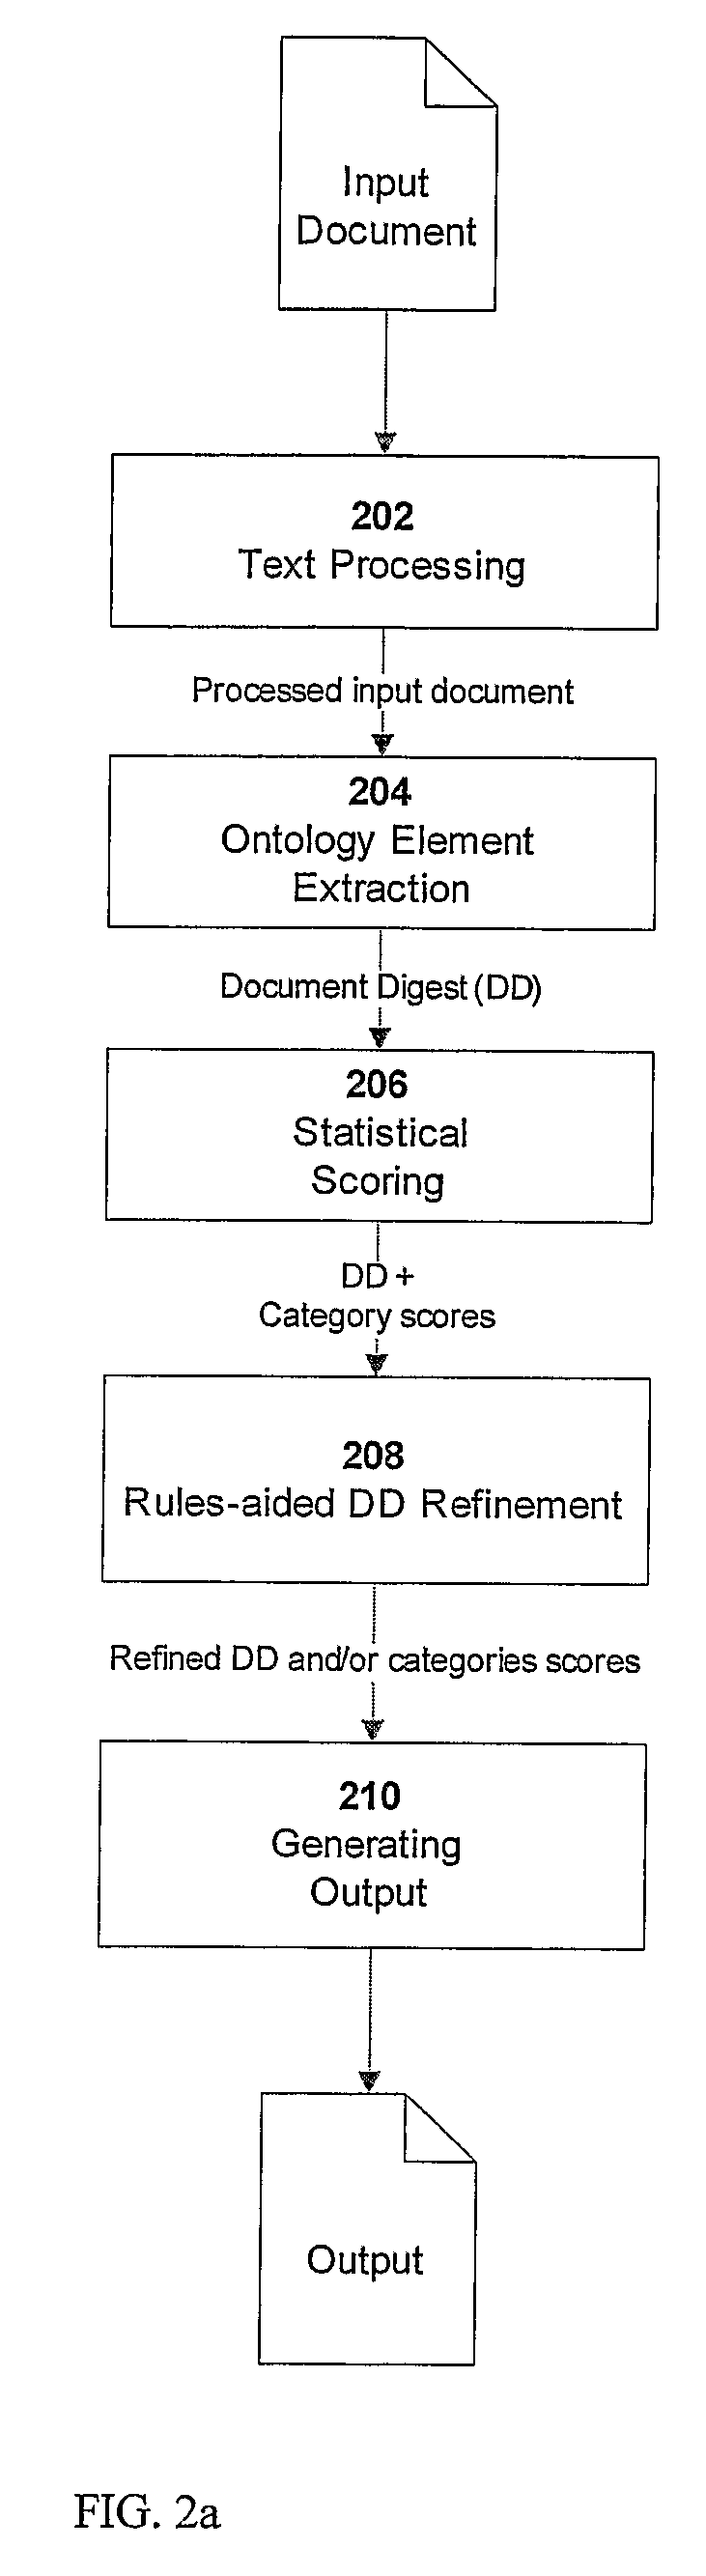 Decision-support expert system and methods for real-time exploitation of documents in non-english languages